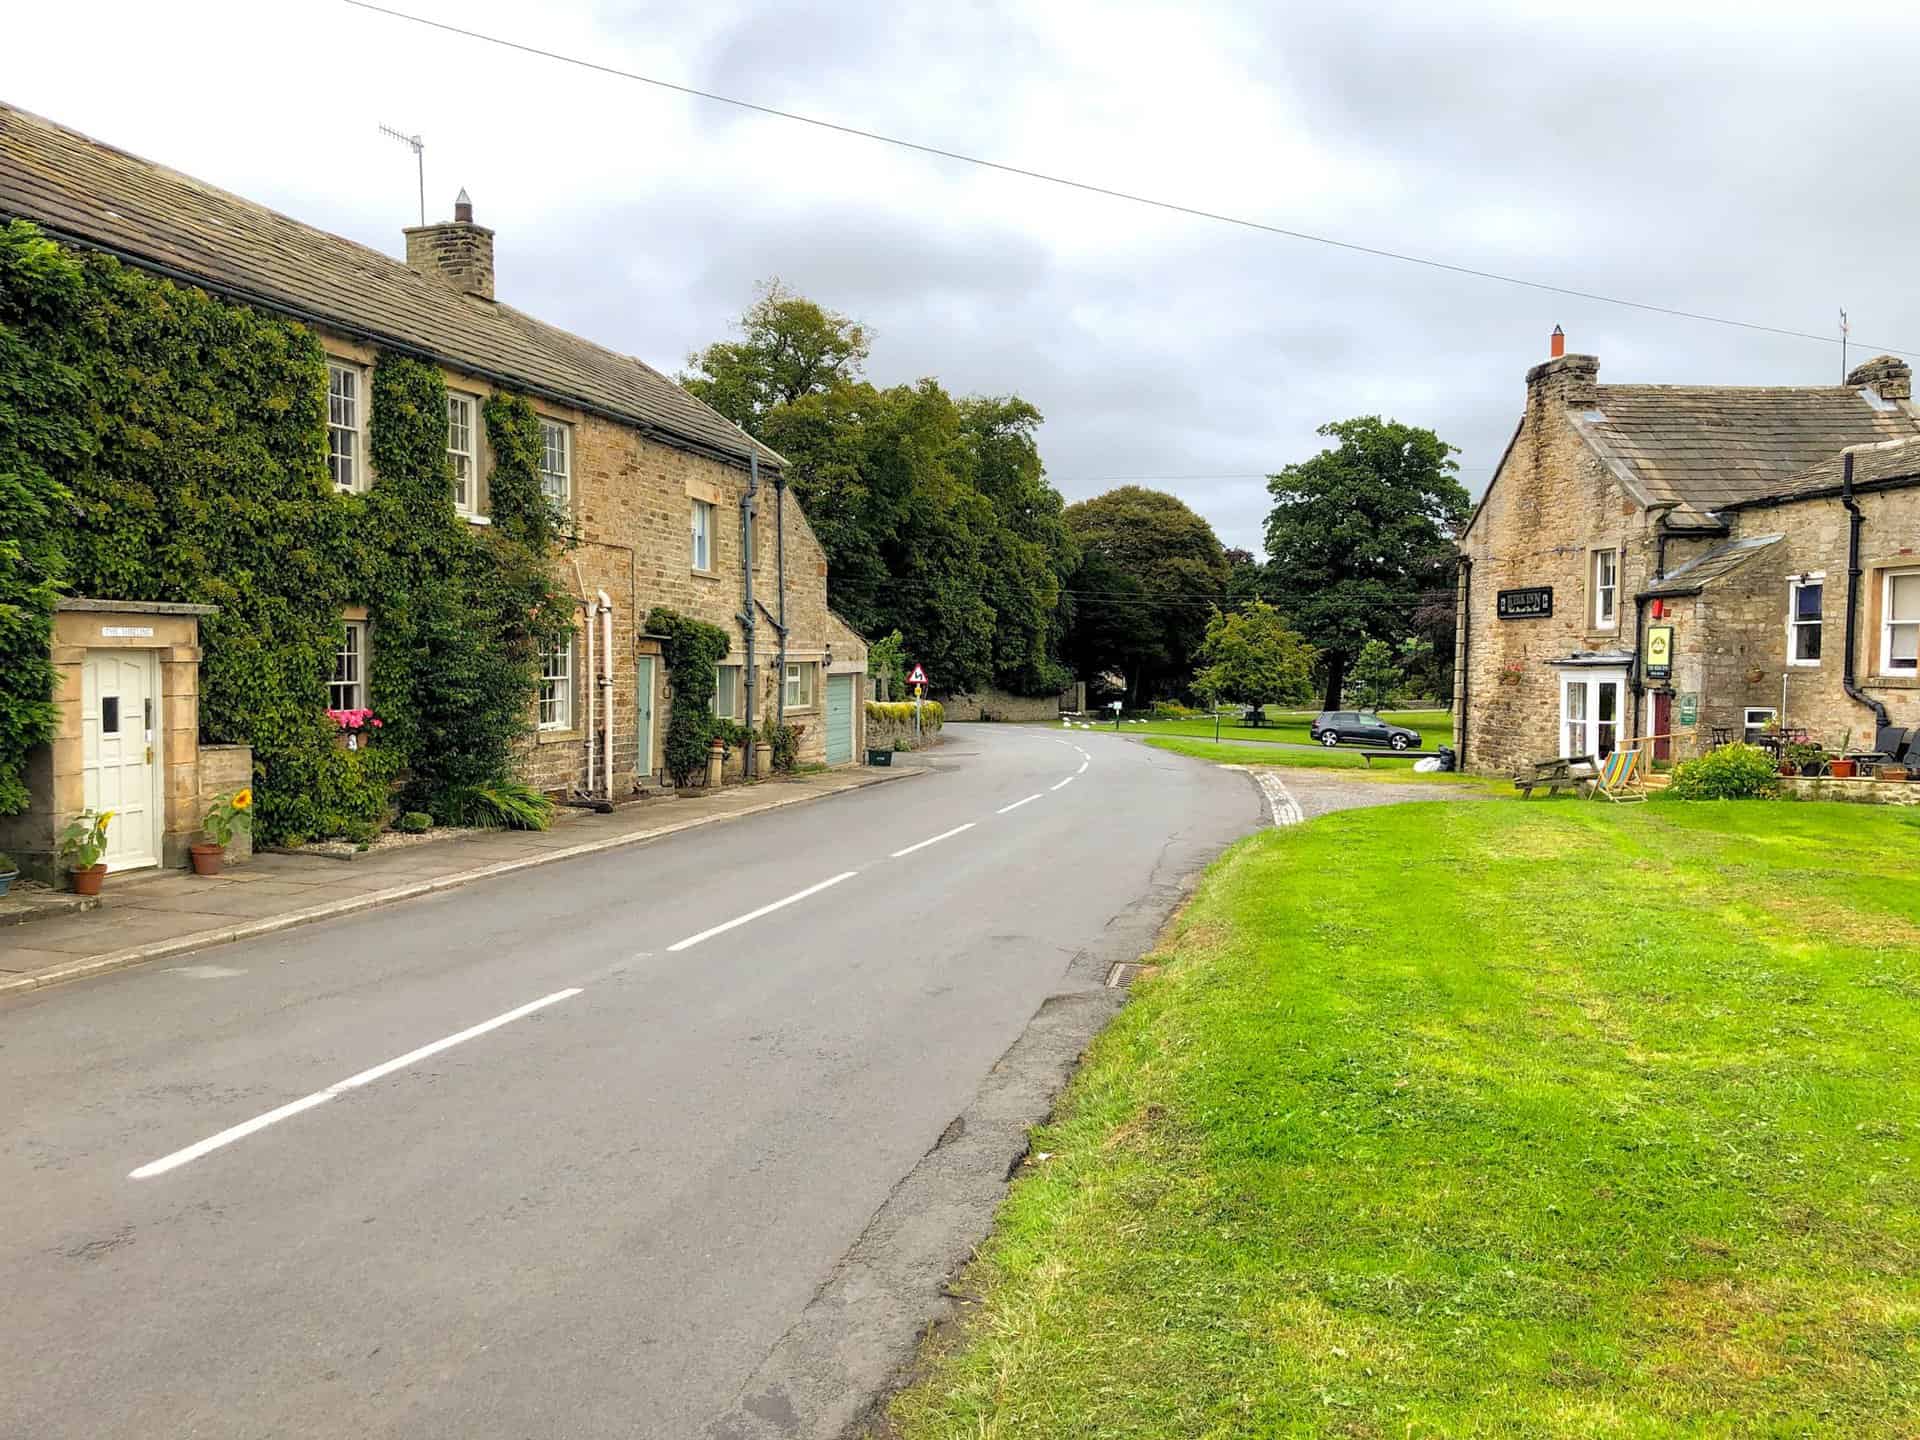 Romaldkirk, a picturesque village that serves as an ideal pause on this Barnard Castle walk.